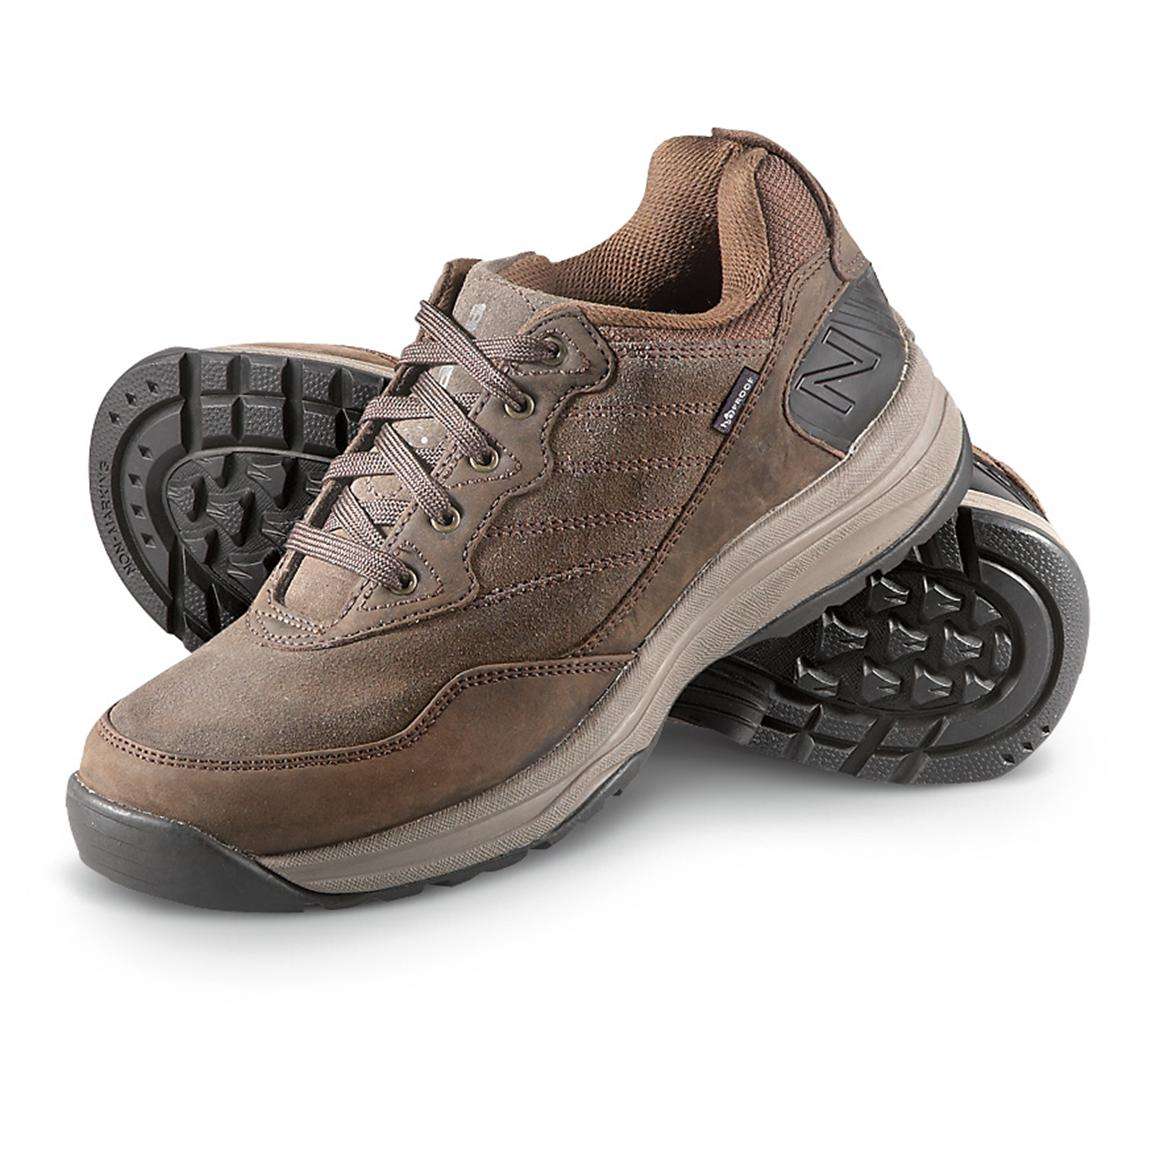 What Are The Best Walking Shoes For Men - LoveShoesClub.com